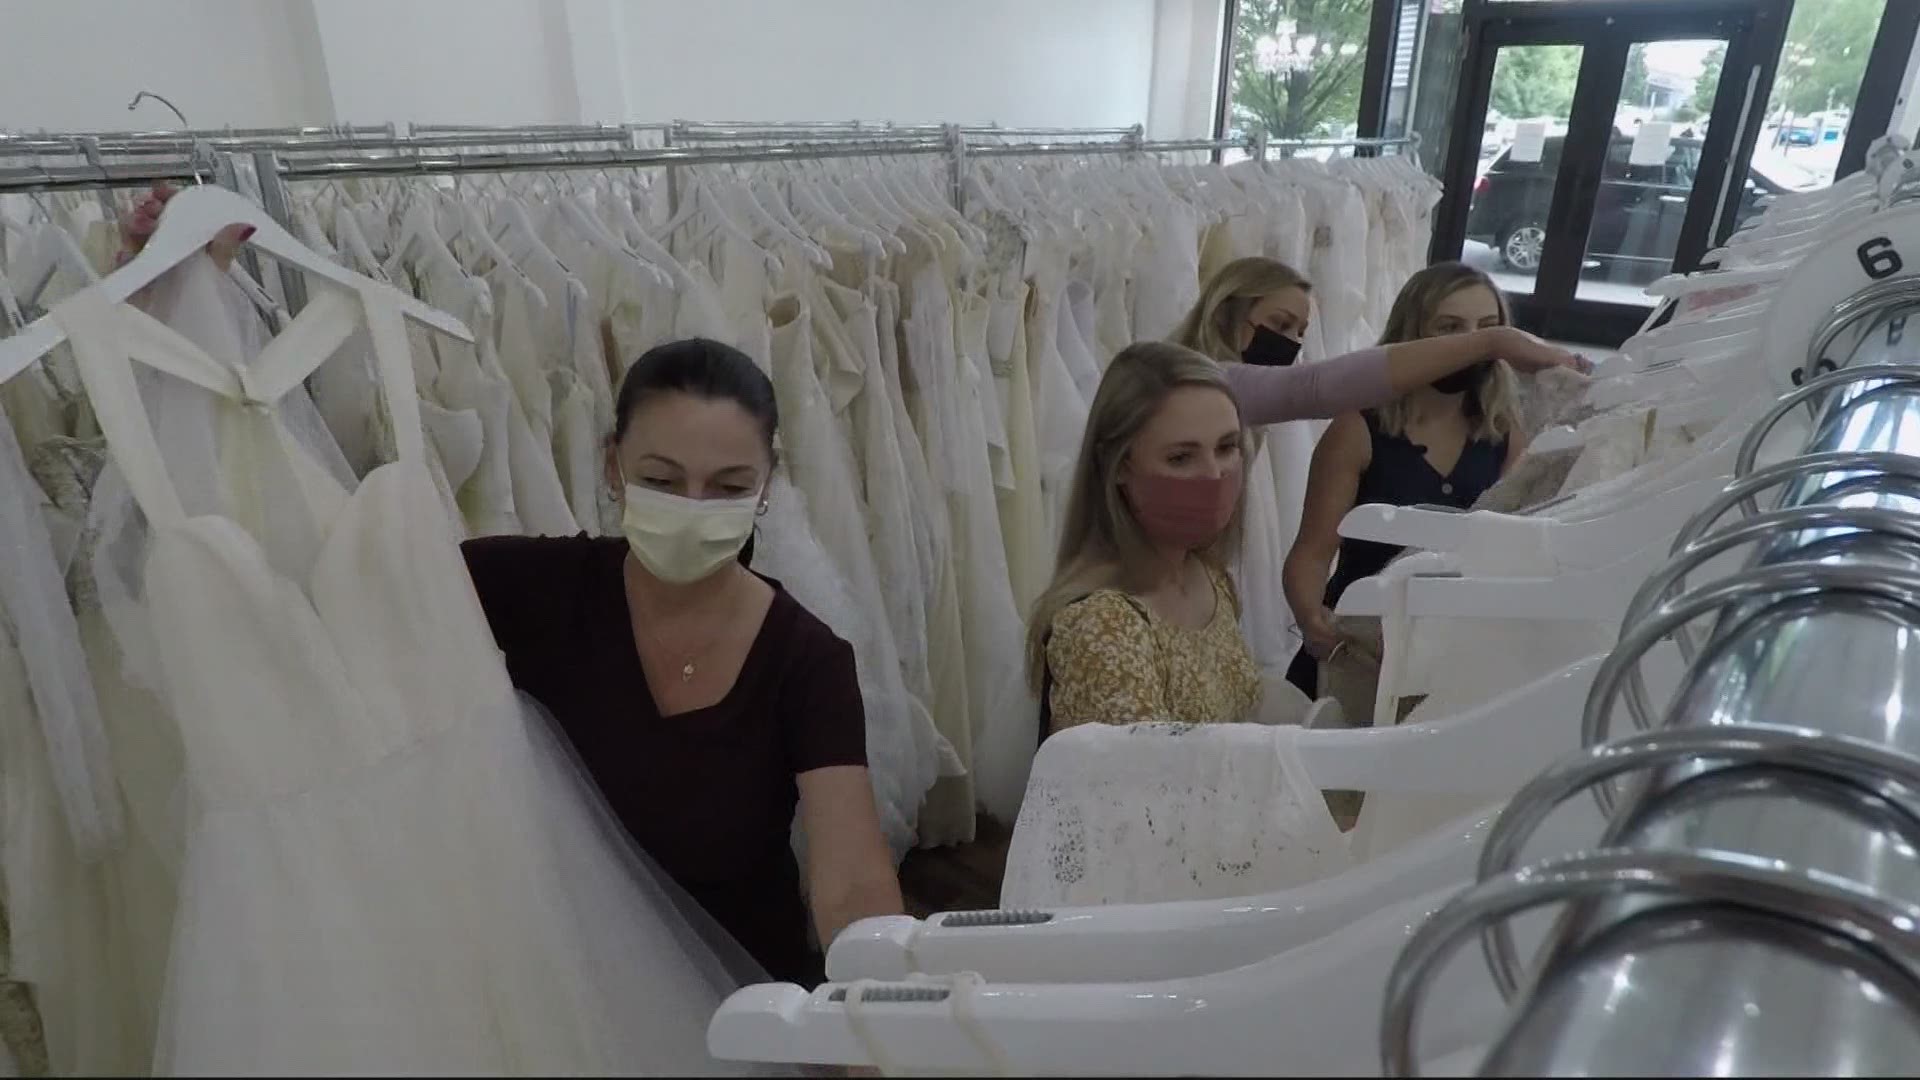 Brides for a Cause teamed up with nonprofit Brides Across America to give 20 local brides who are nurses and doctors a free wedding dress.